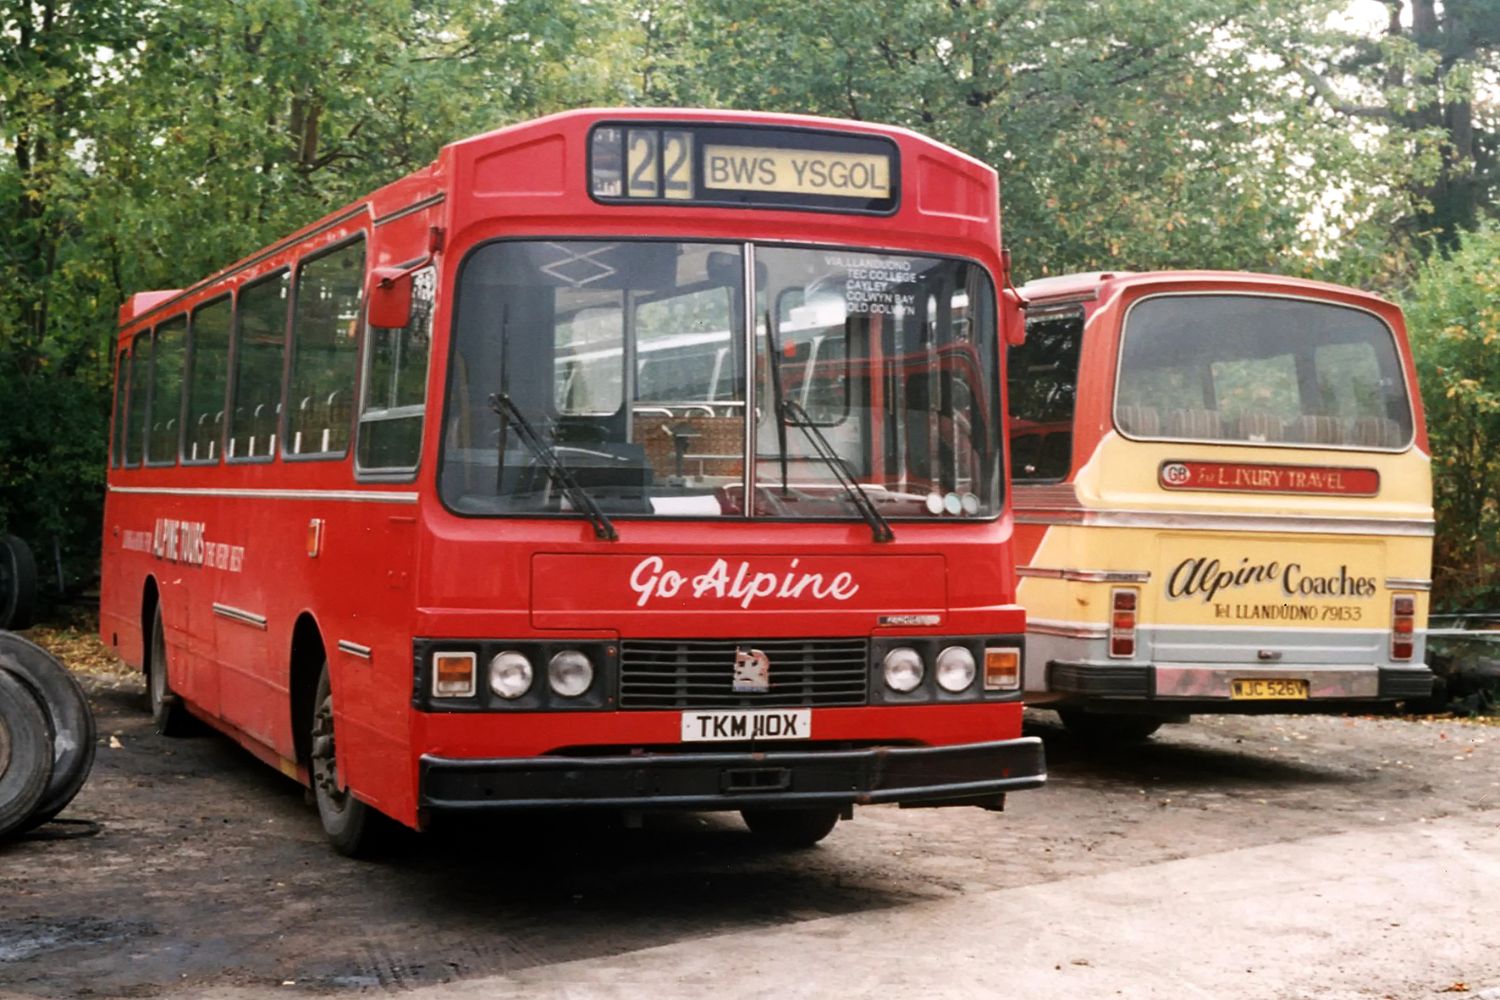 Distinctive Wadham Stringer bodywork was carried by this Bedford YNT which was in use as a school bus in 1990. It is obscuring most of a Duple Dominant bodied Ford R1114 that was one of the first brand new vehicles bought by Alpine Travel in 1979 (Copyright Arnold Chave)